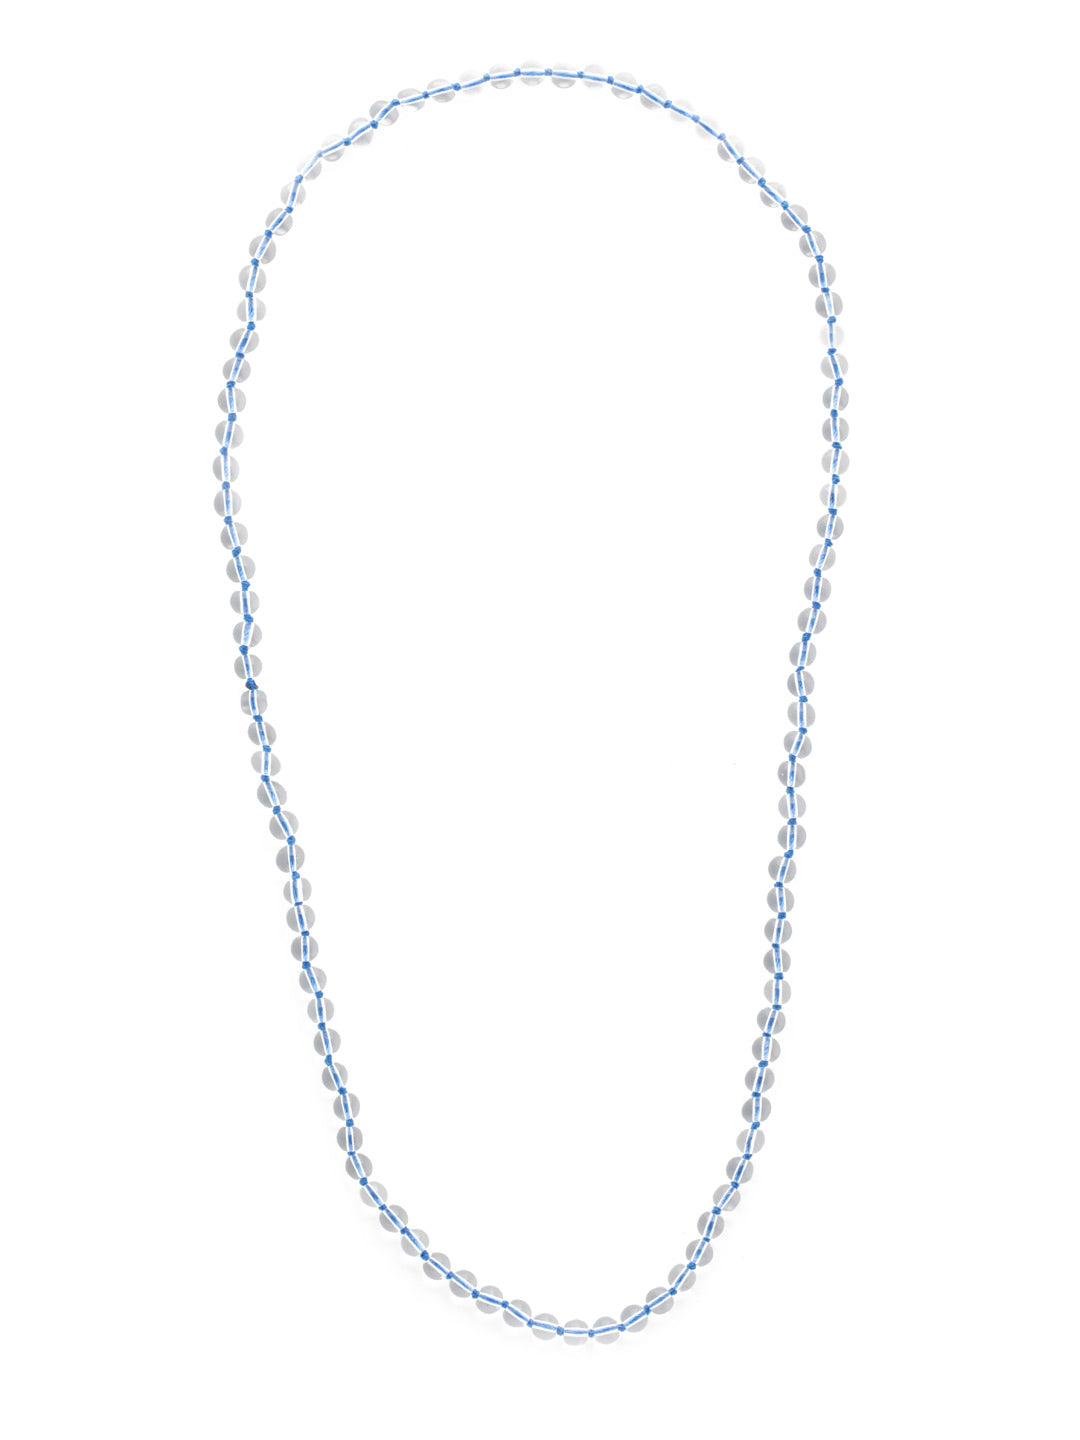 Prue Long Necklace - NEV40PDWNB - <p>Our Prue Long Necklace is a must if you're looking for a unique staple piece that will stand the test of time. Entirely lined in clear beadwork, it's a classic. From Sorrelli's Windsor Blue collection in our Palladium finish.</p>